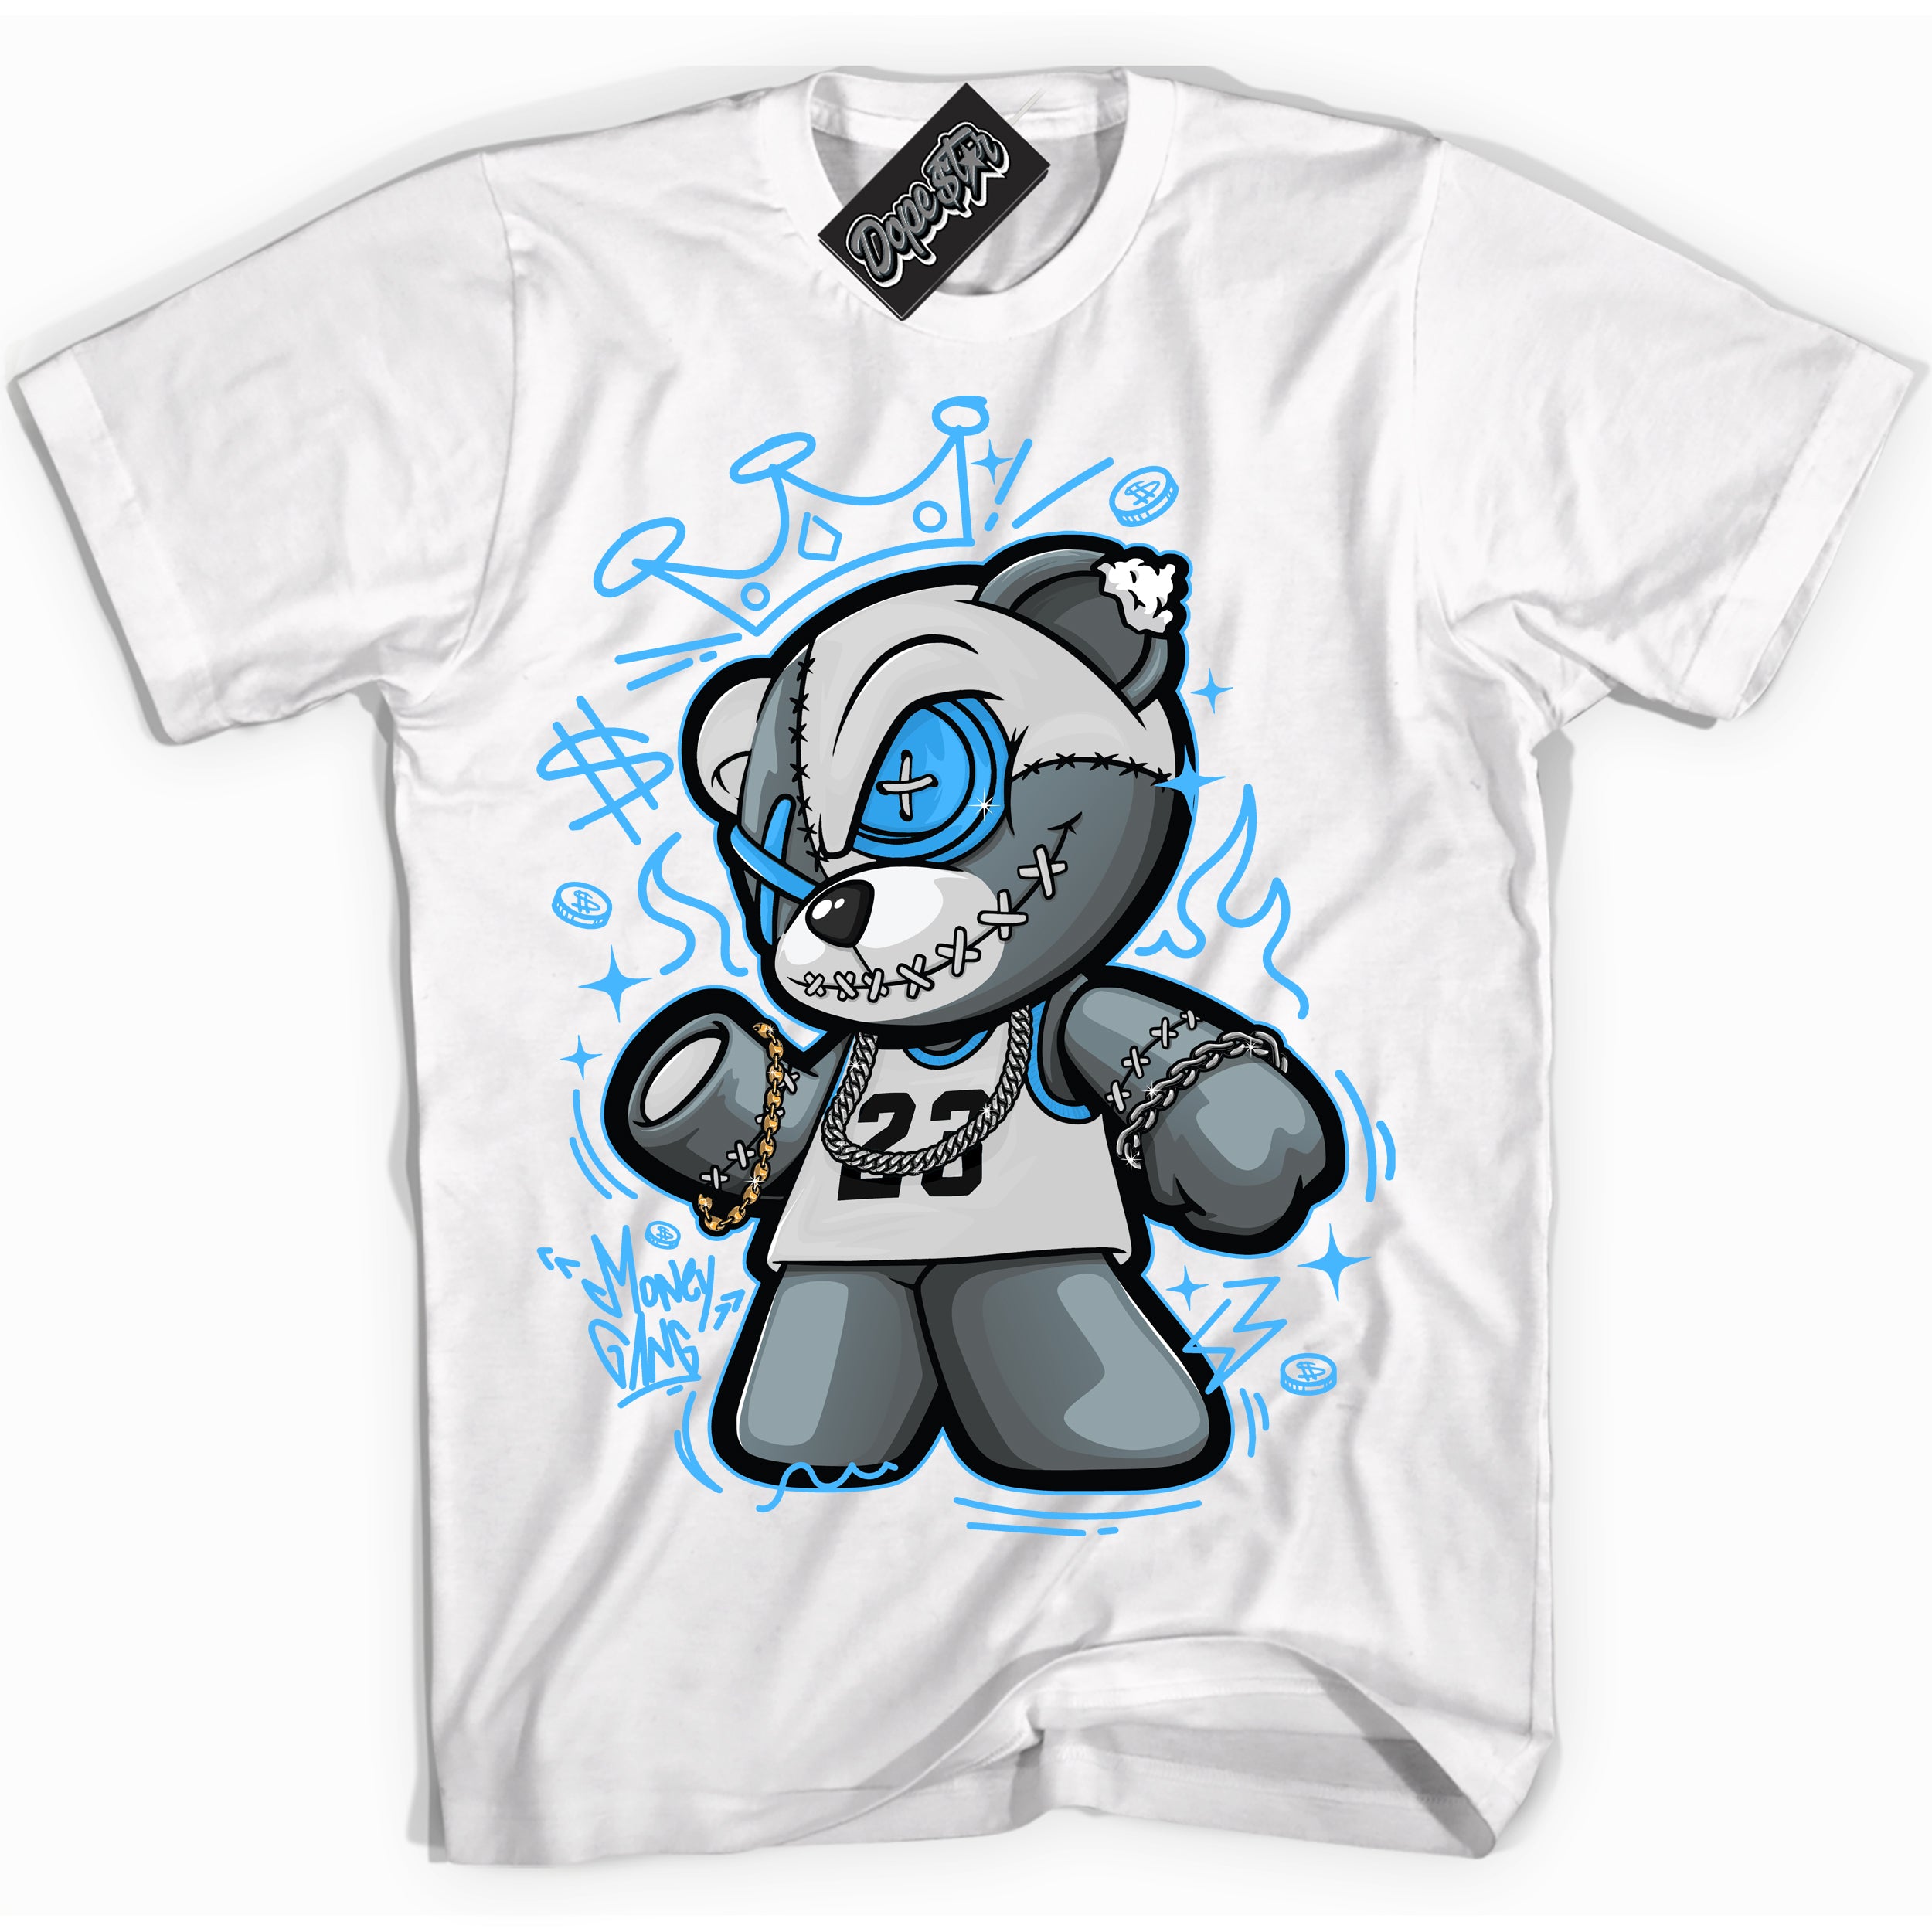 Cool White graphic tee with “ Money Gang Bear ” design, that perfectly matches Powder Blue 9s sneakers 